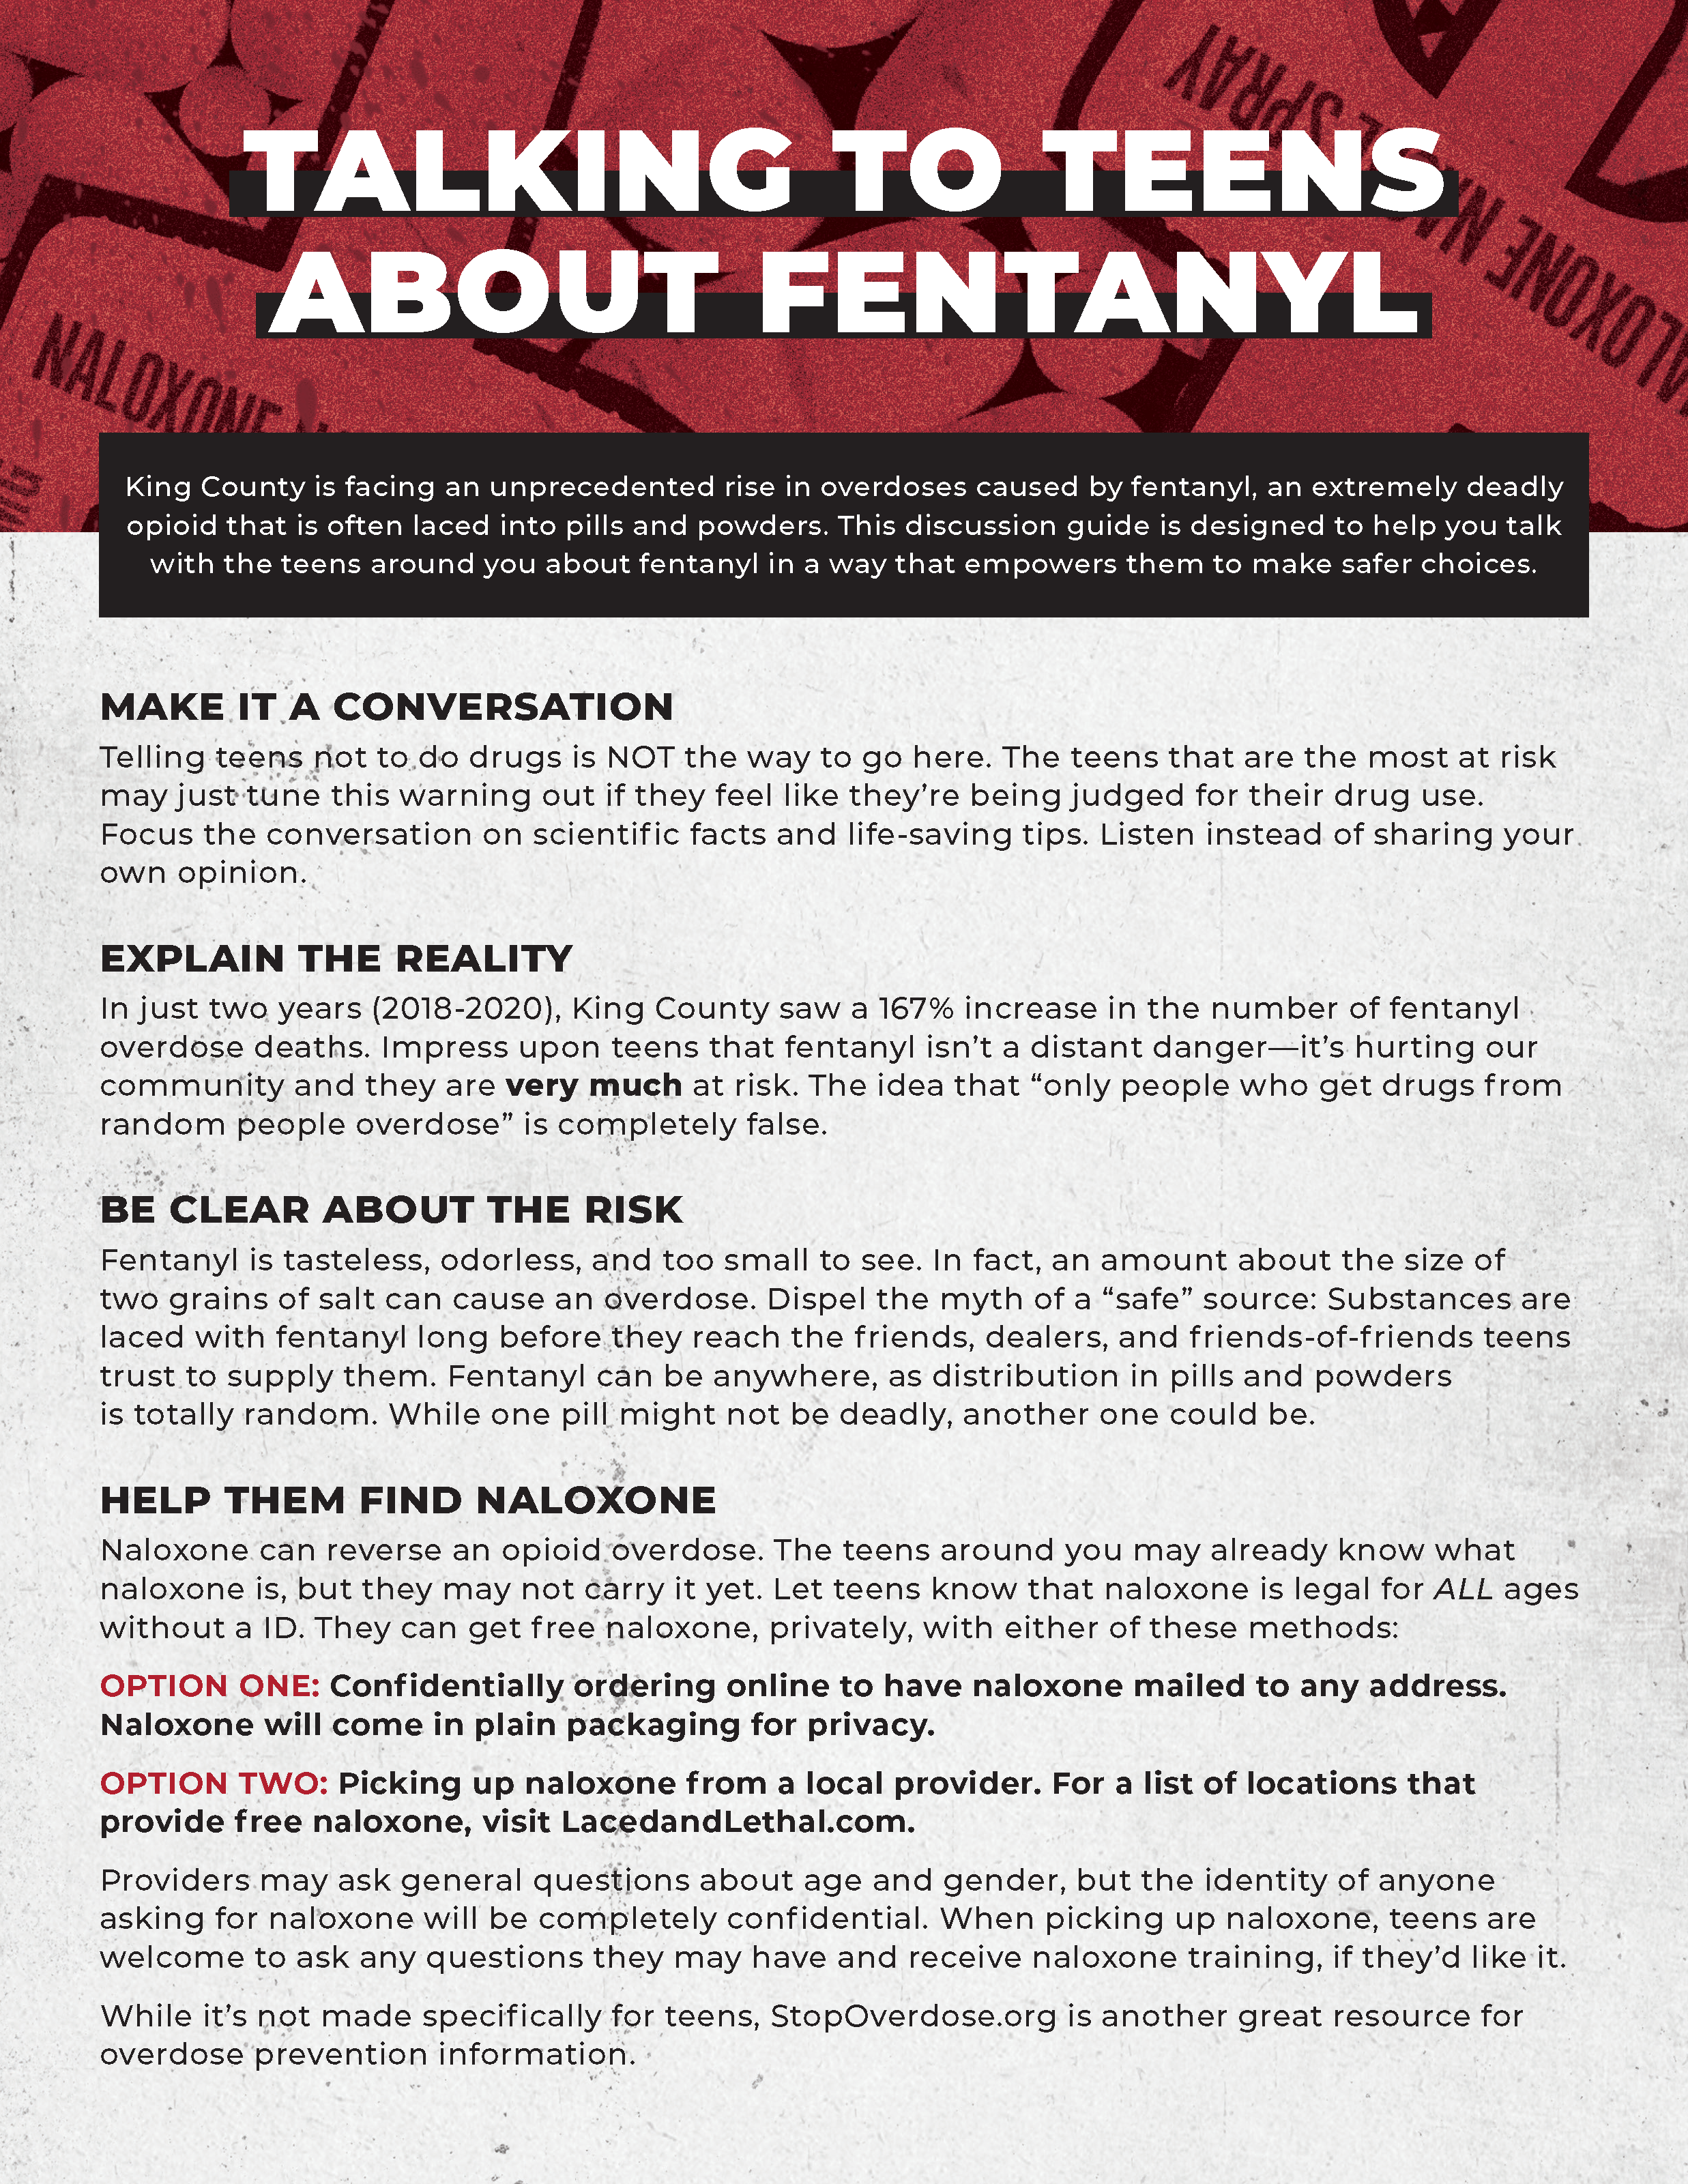 Fentanyl Warning and Important Information